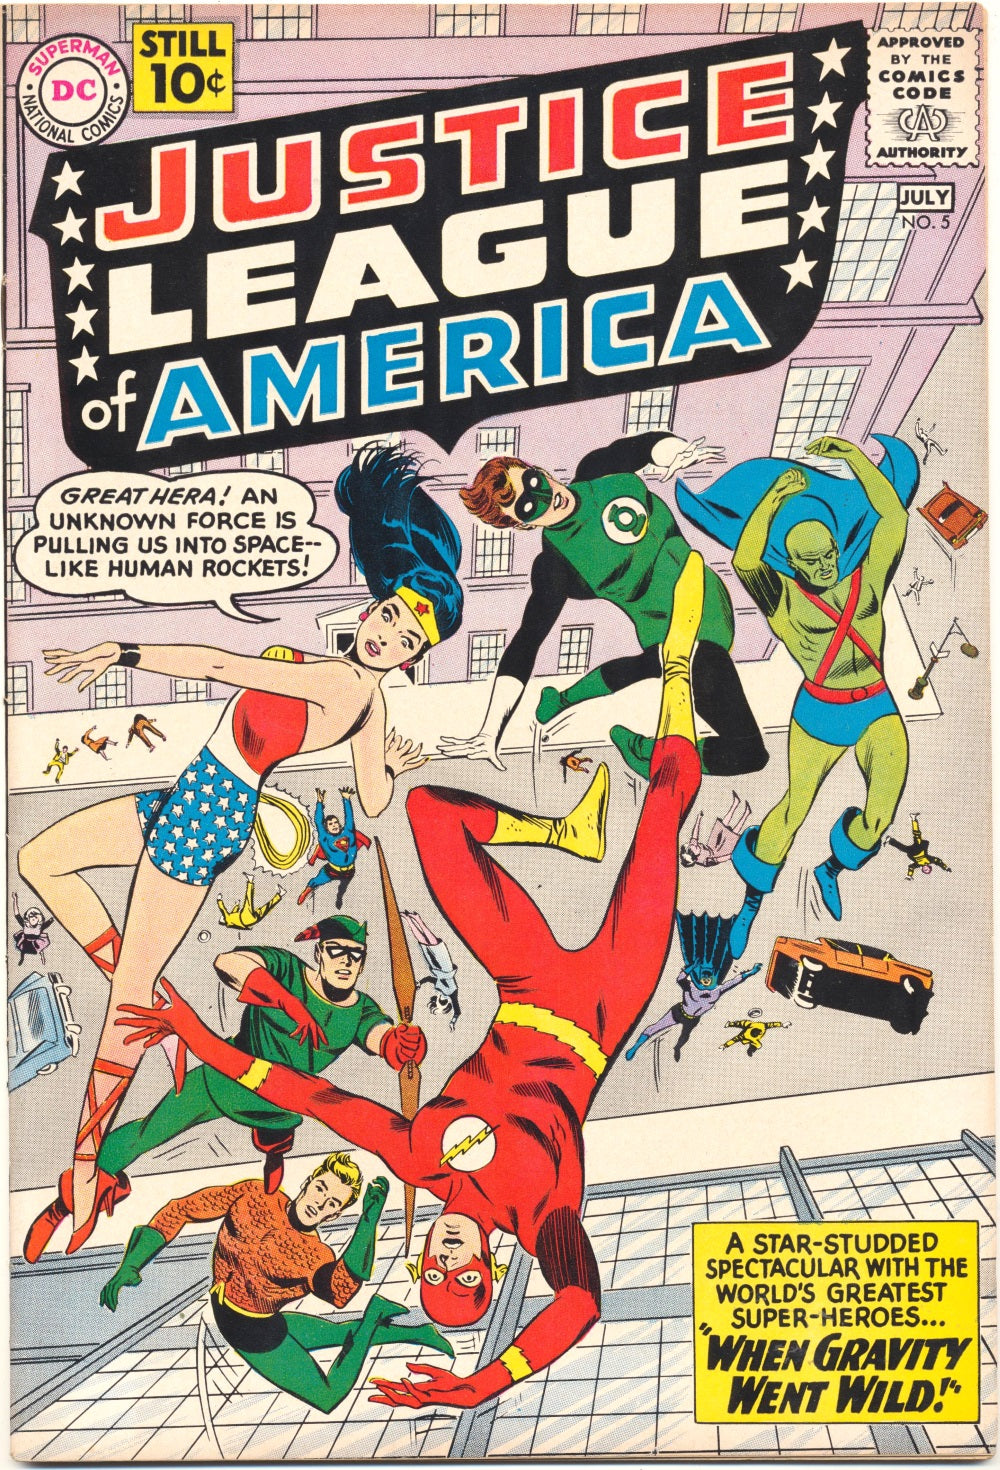 JUSTICE LEAGUE OF AMERICA 5 FN+ (6.5)